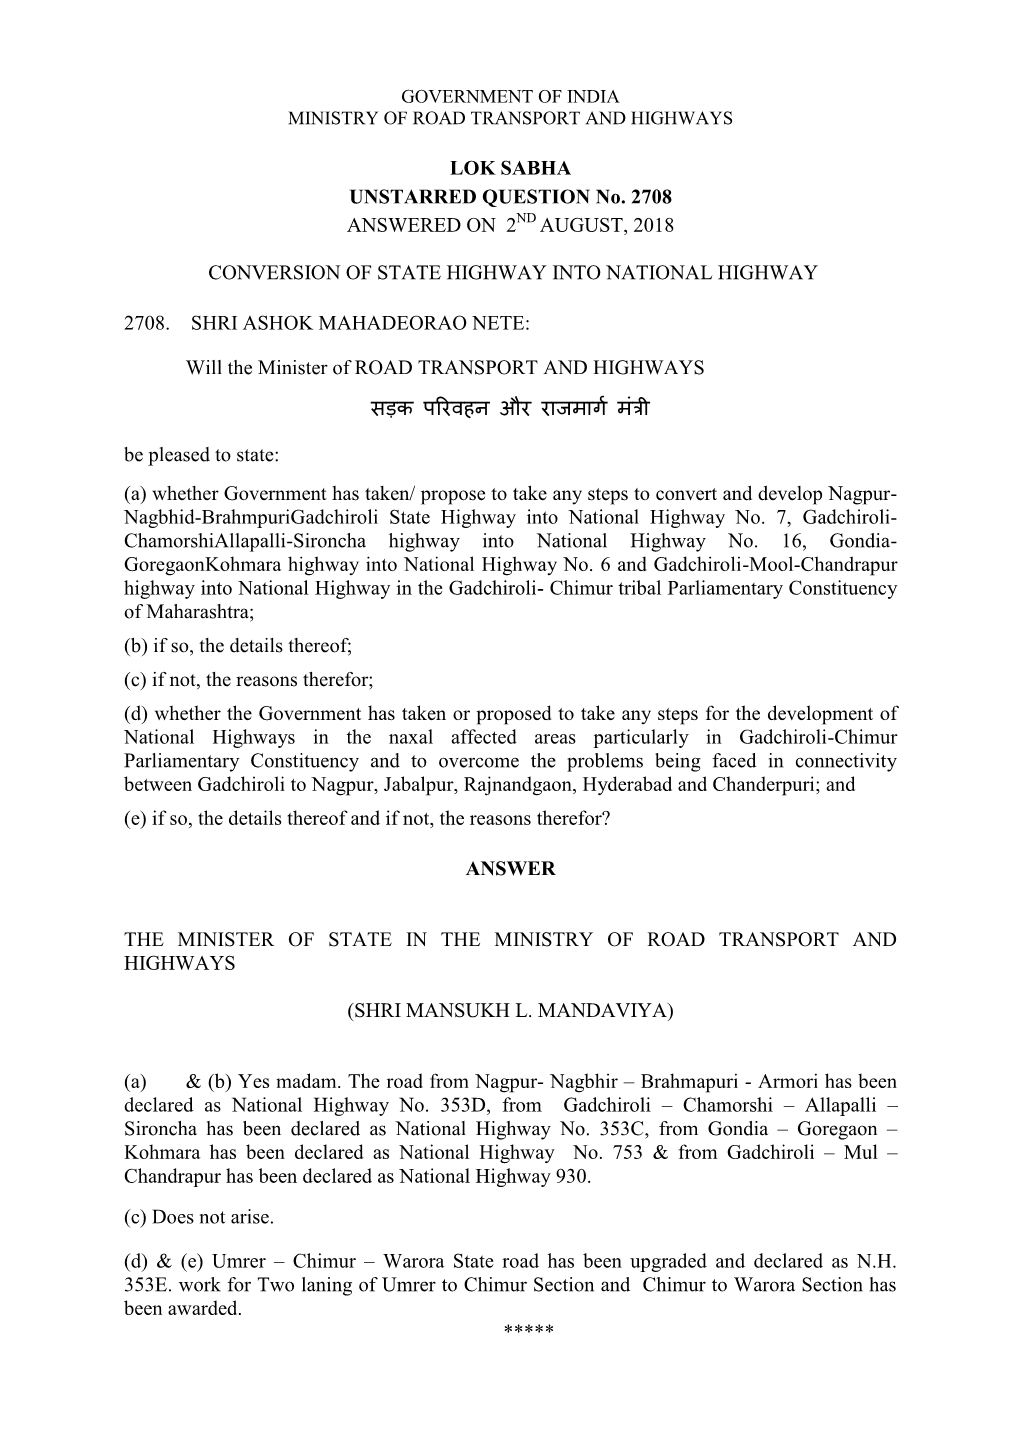 LOK SABHA UNSTARRED QUESTION No. 2708 ANSWERED on 2 AUGUST, 2018 CONVERSION of STATE HIGHWAY INTO NATIONAL HIGHWAY 2708. SHRI